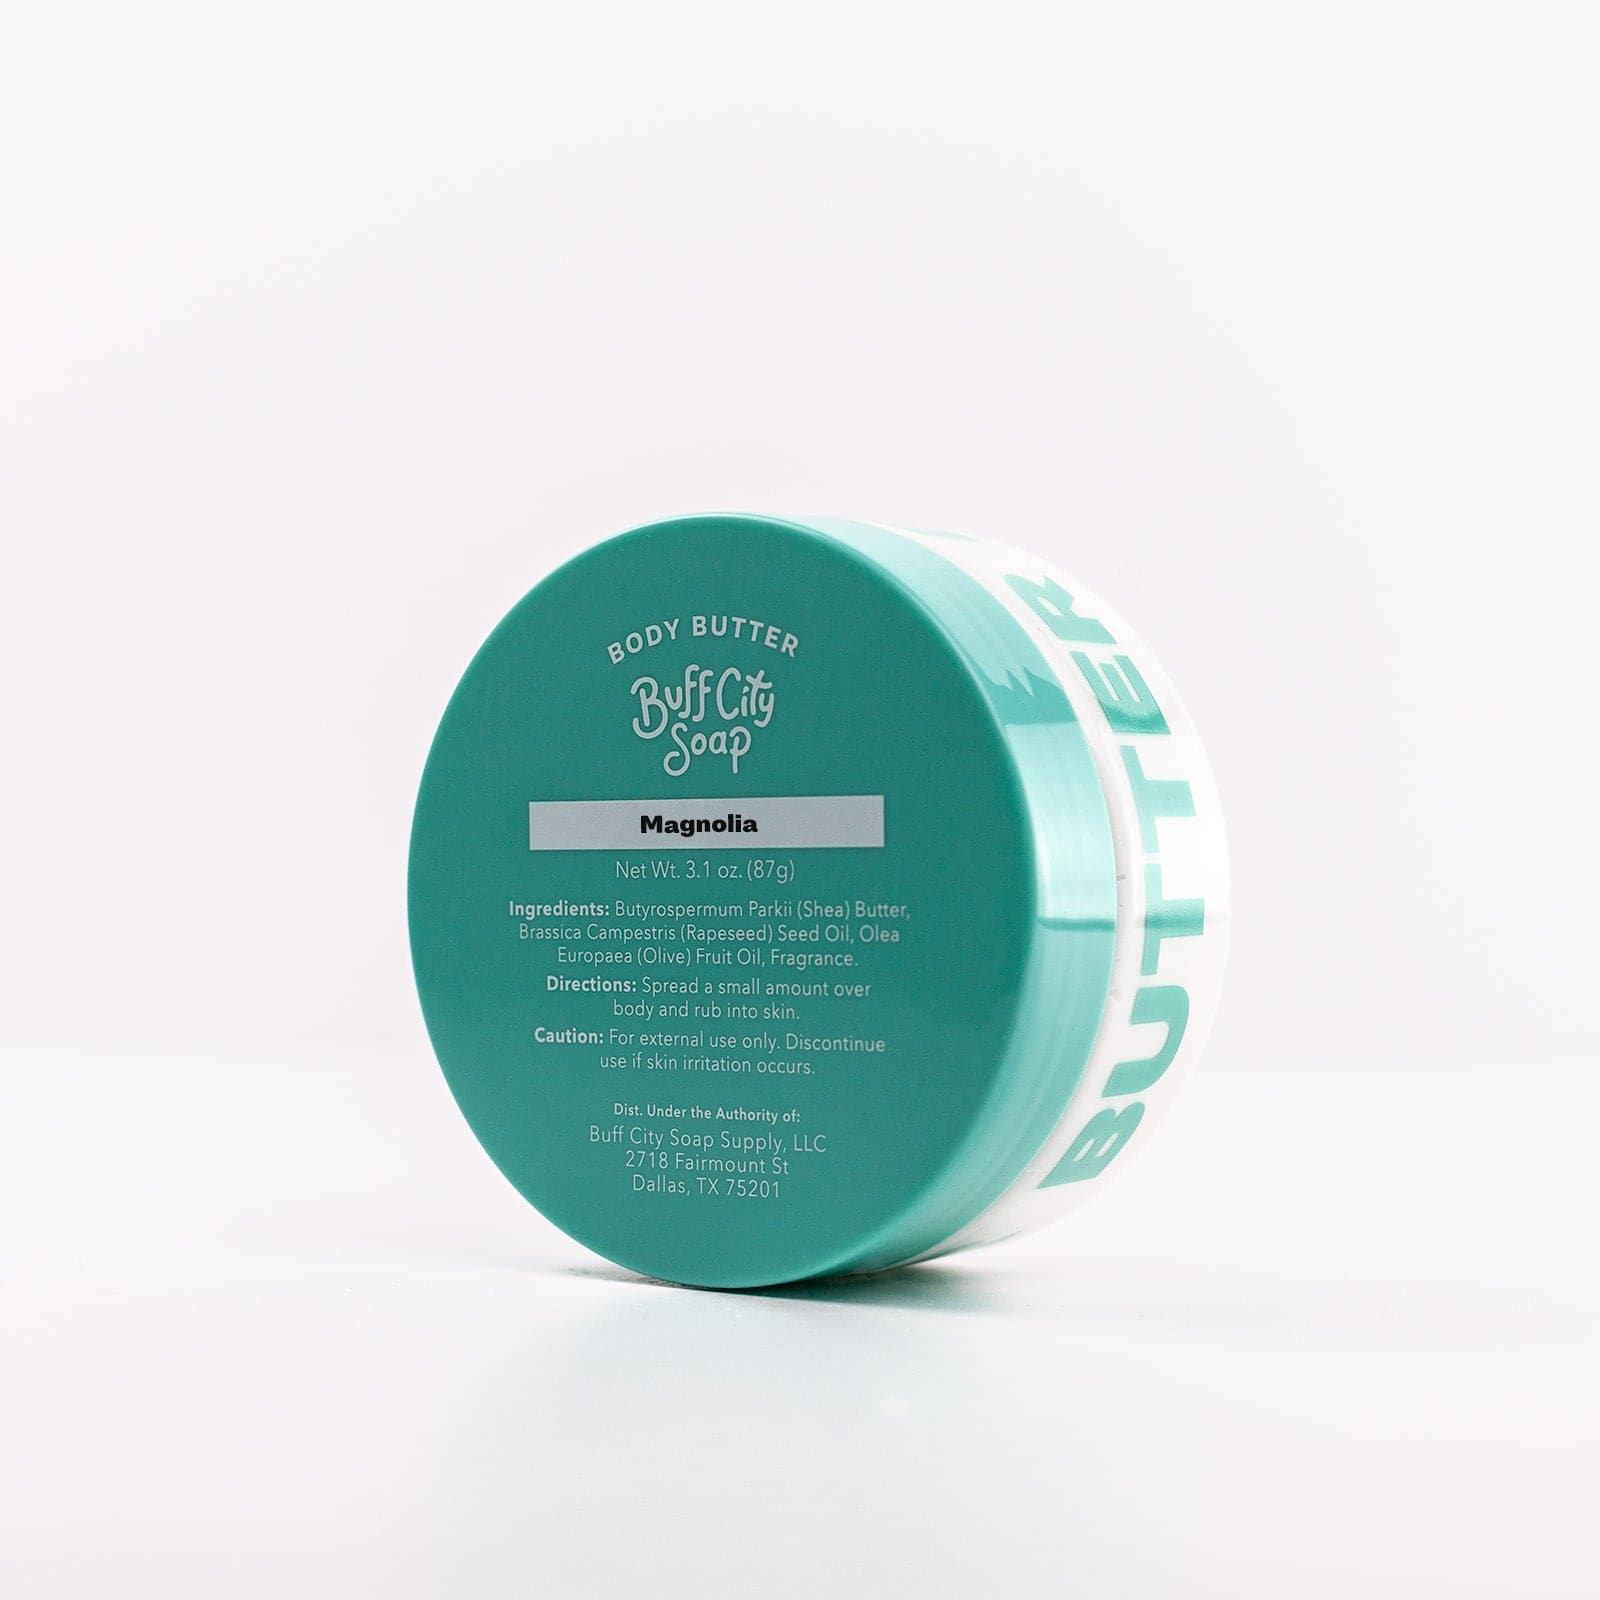 side of Buff City Soap's magnolia body butter listing directions, ingredients and cautions